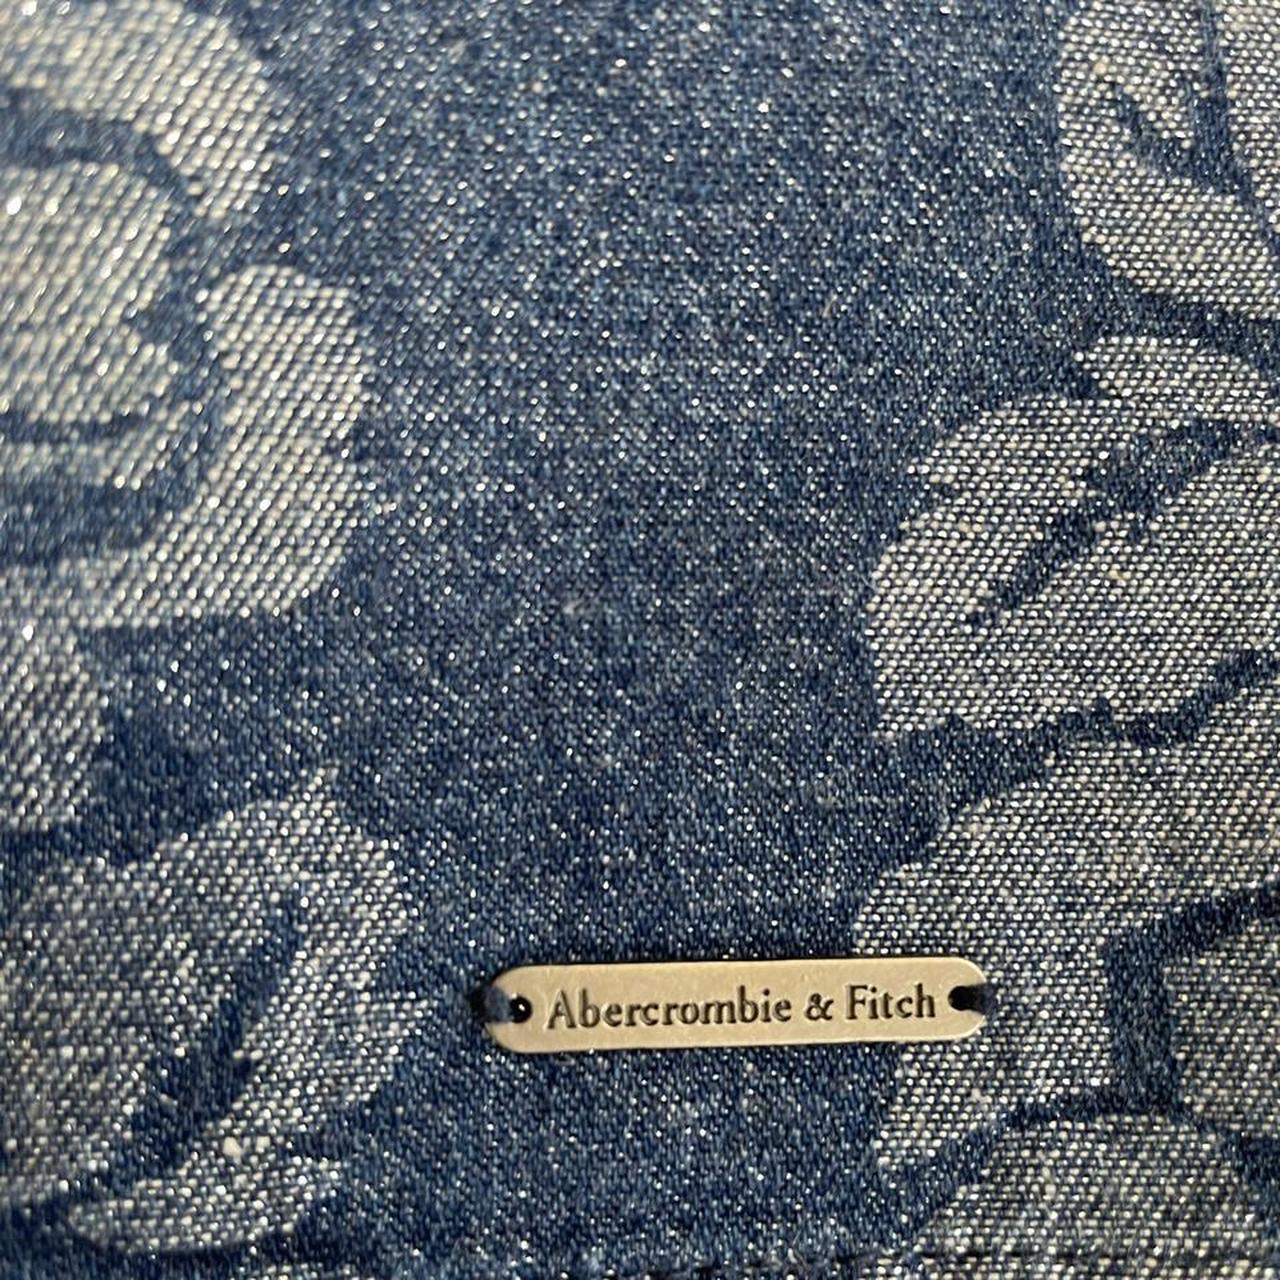 Abercrombie & Fitch Women's Blue Skirt (3)